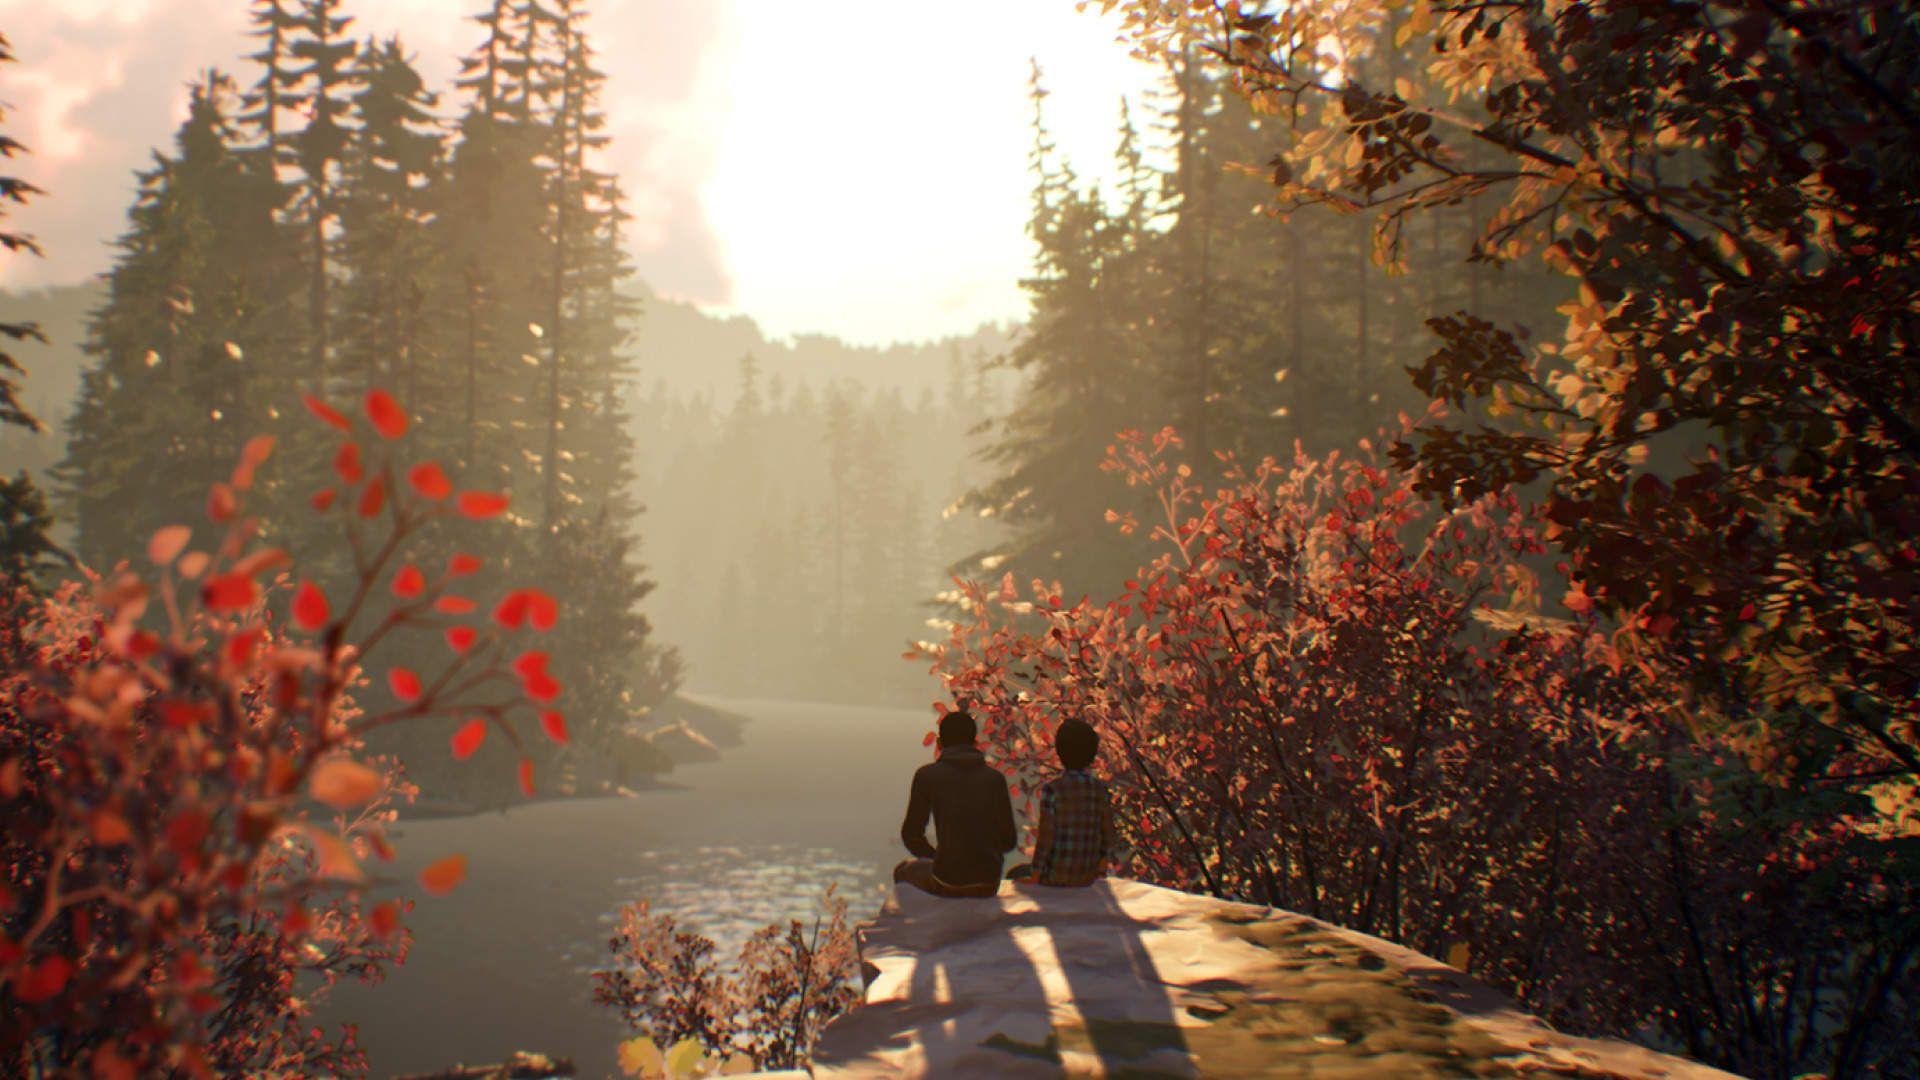 tell me why life is strange download